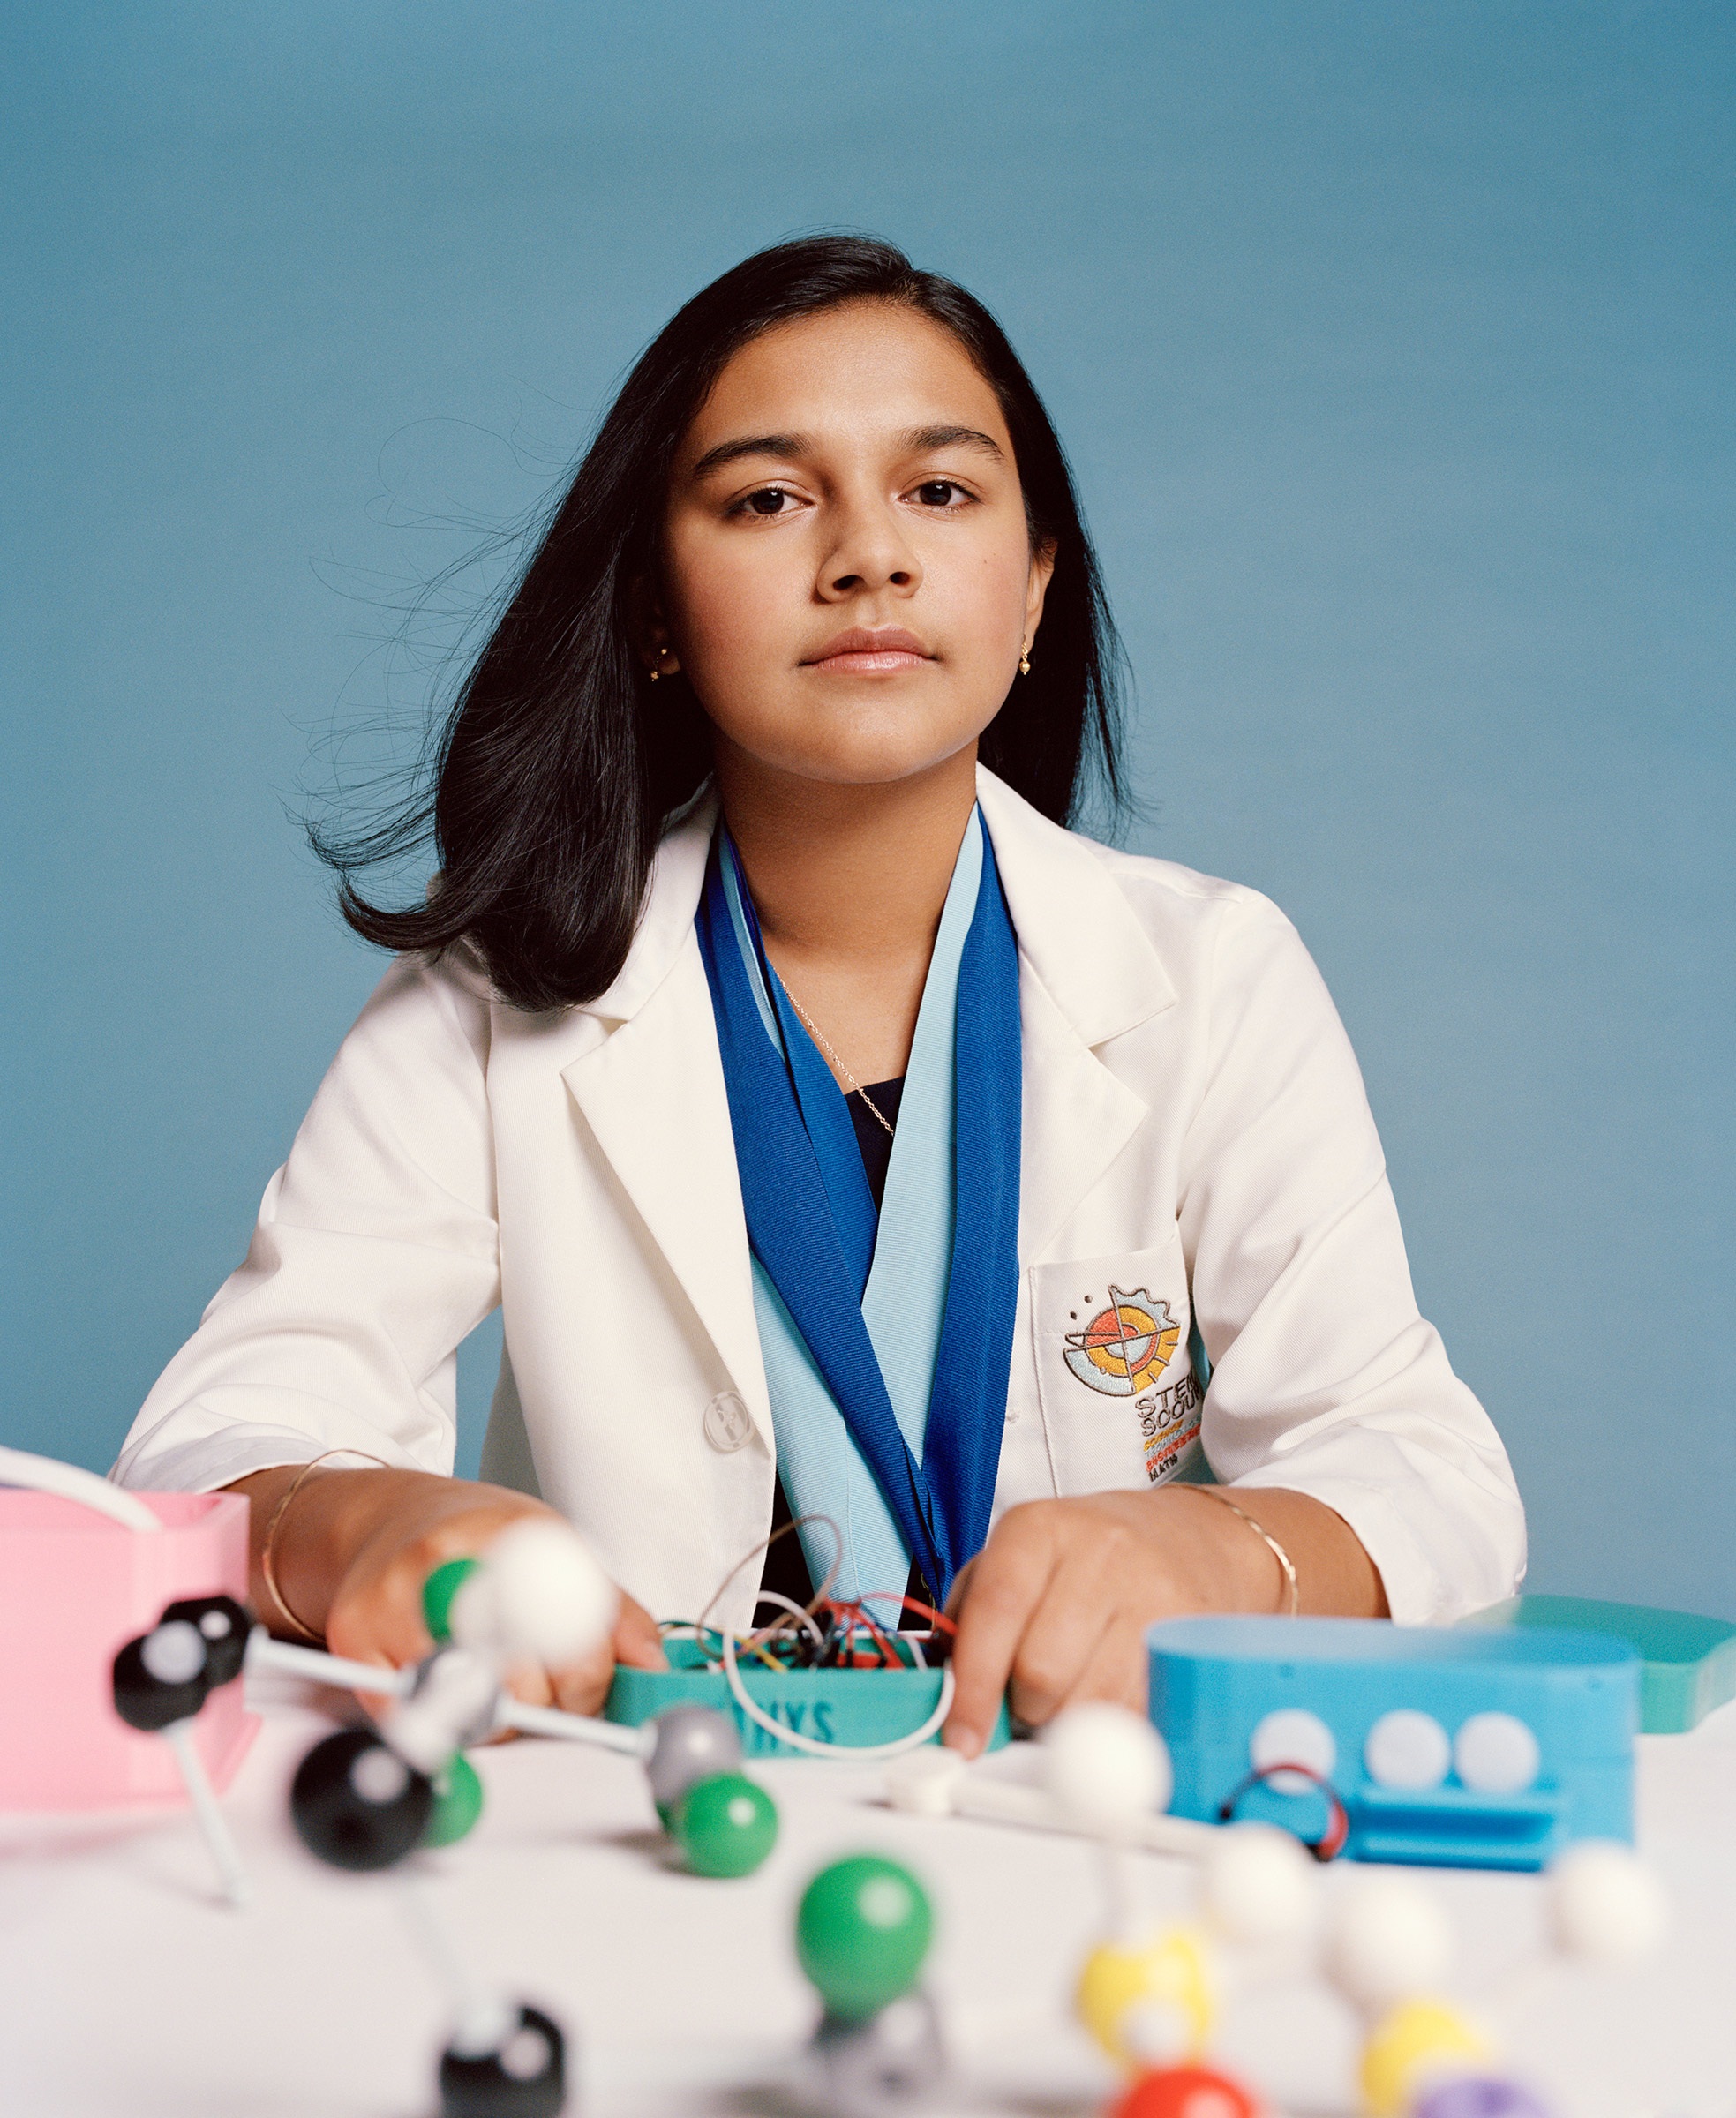 Indian-American Gitanjali Rao named as TIME magazine’s first-ever Kid of the Year for her work in technology